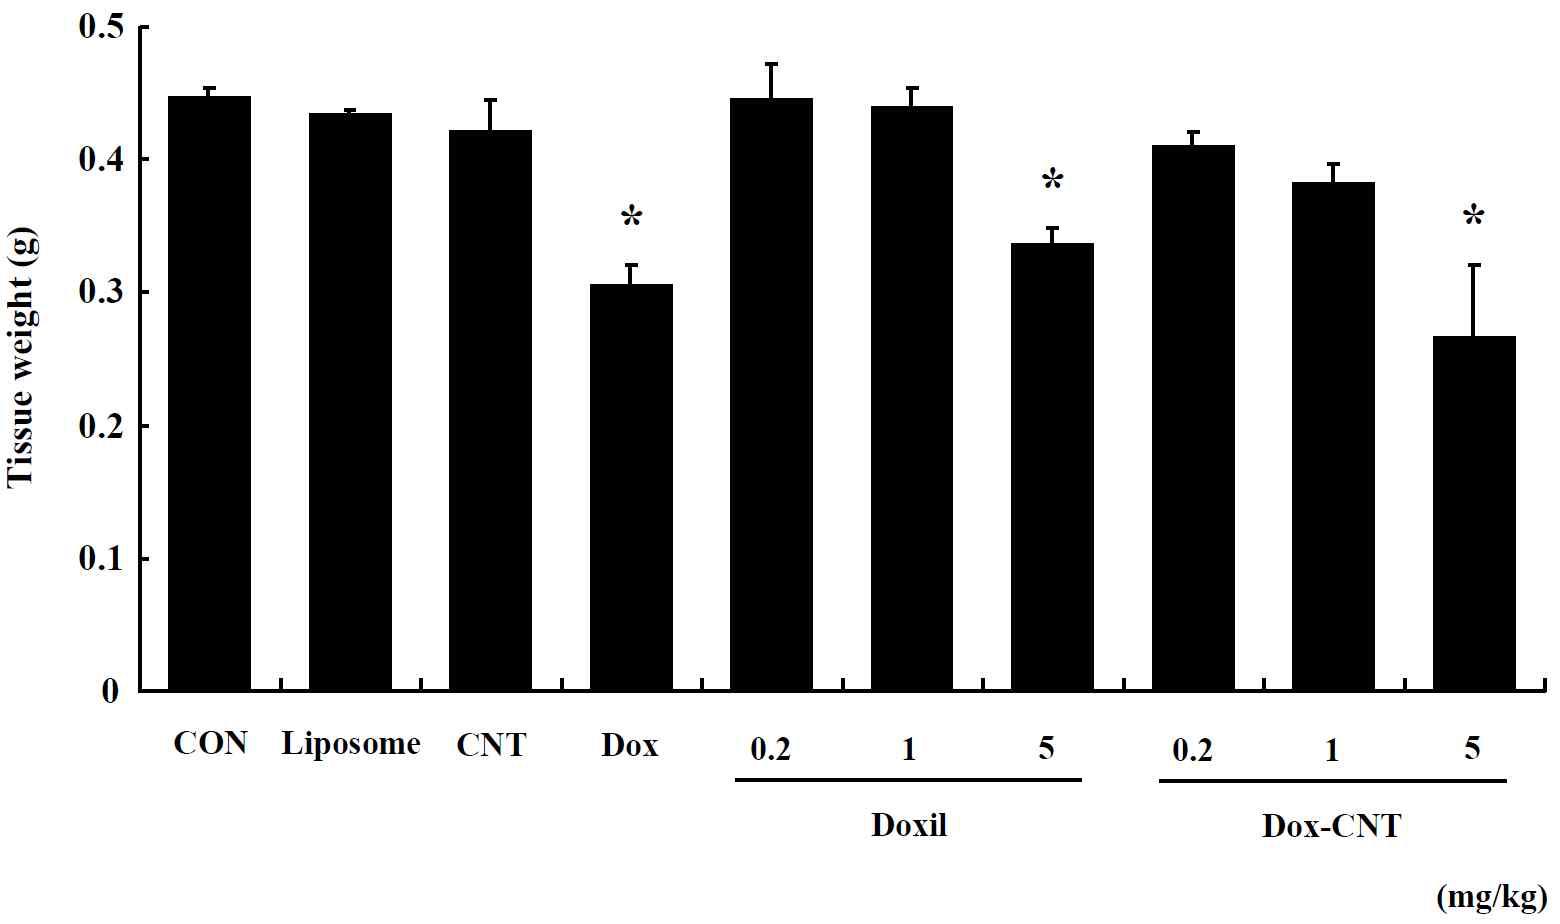 The change of kidney weight in male ICR mice of repeated exposure for 14 days. Mice were respectively administered by intravenous injection with liposome, CNT, Dox, Doxil (0.2, 1, 5 mg/kg) and Dox-CNT (0.2, 1, 5 mg/kg). The results are presented as mean ± SE (n = 10). * p < 0.05, significantly different from the control.